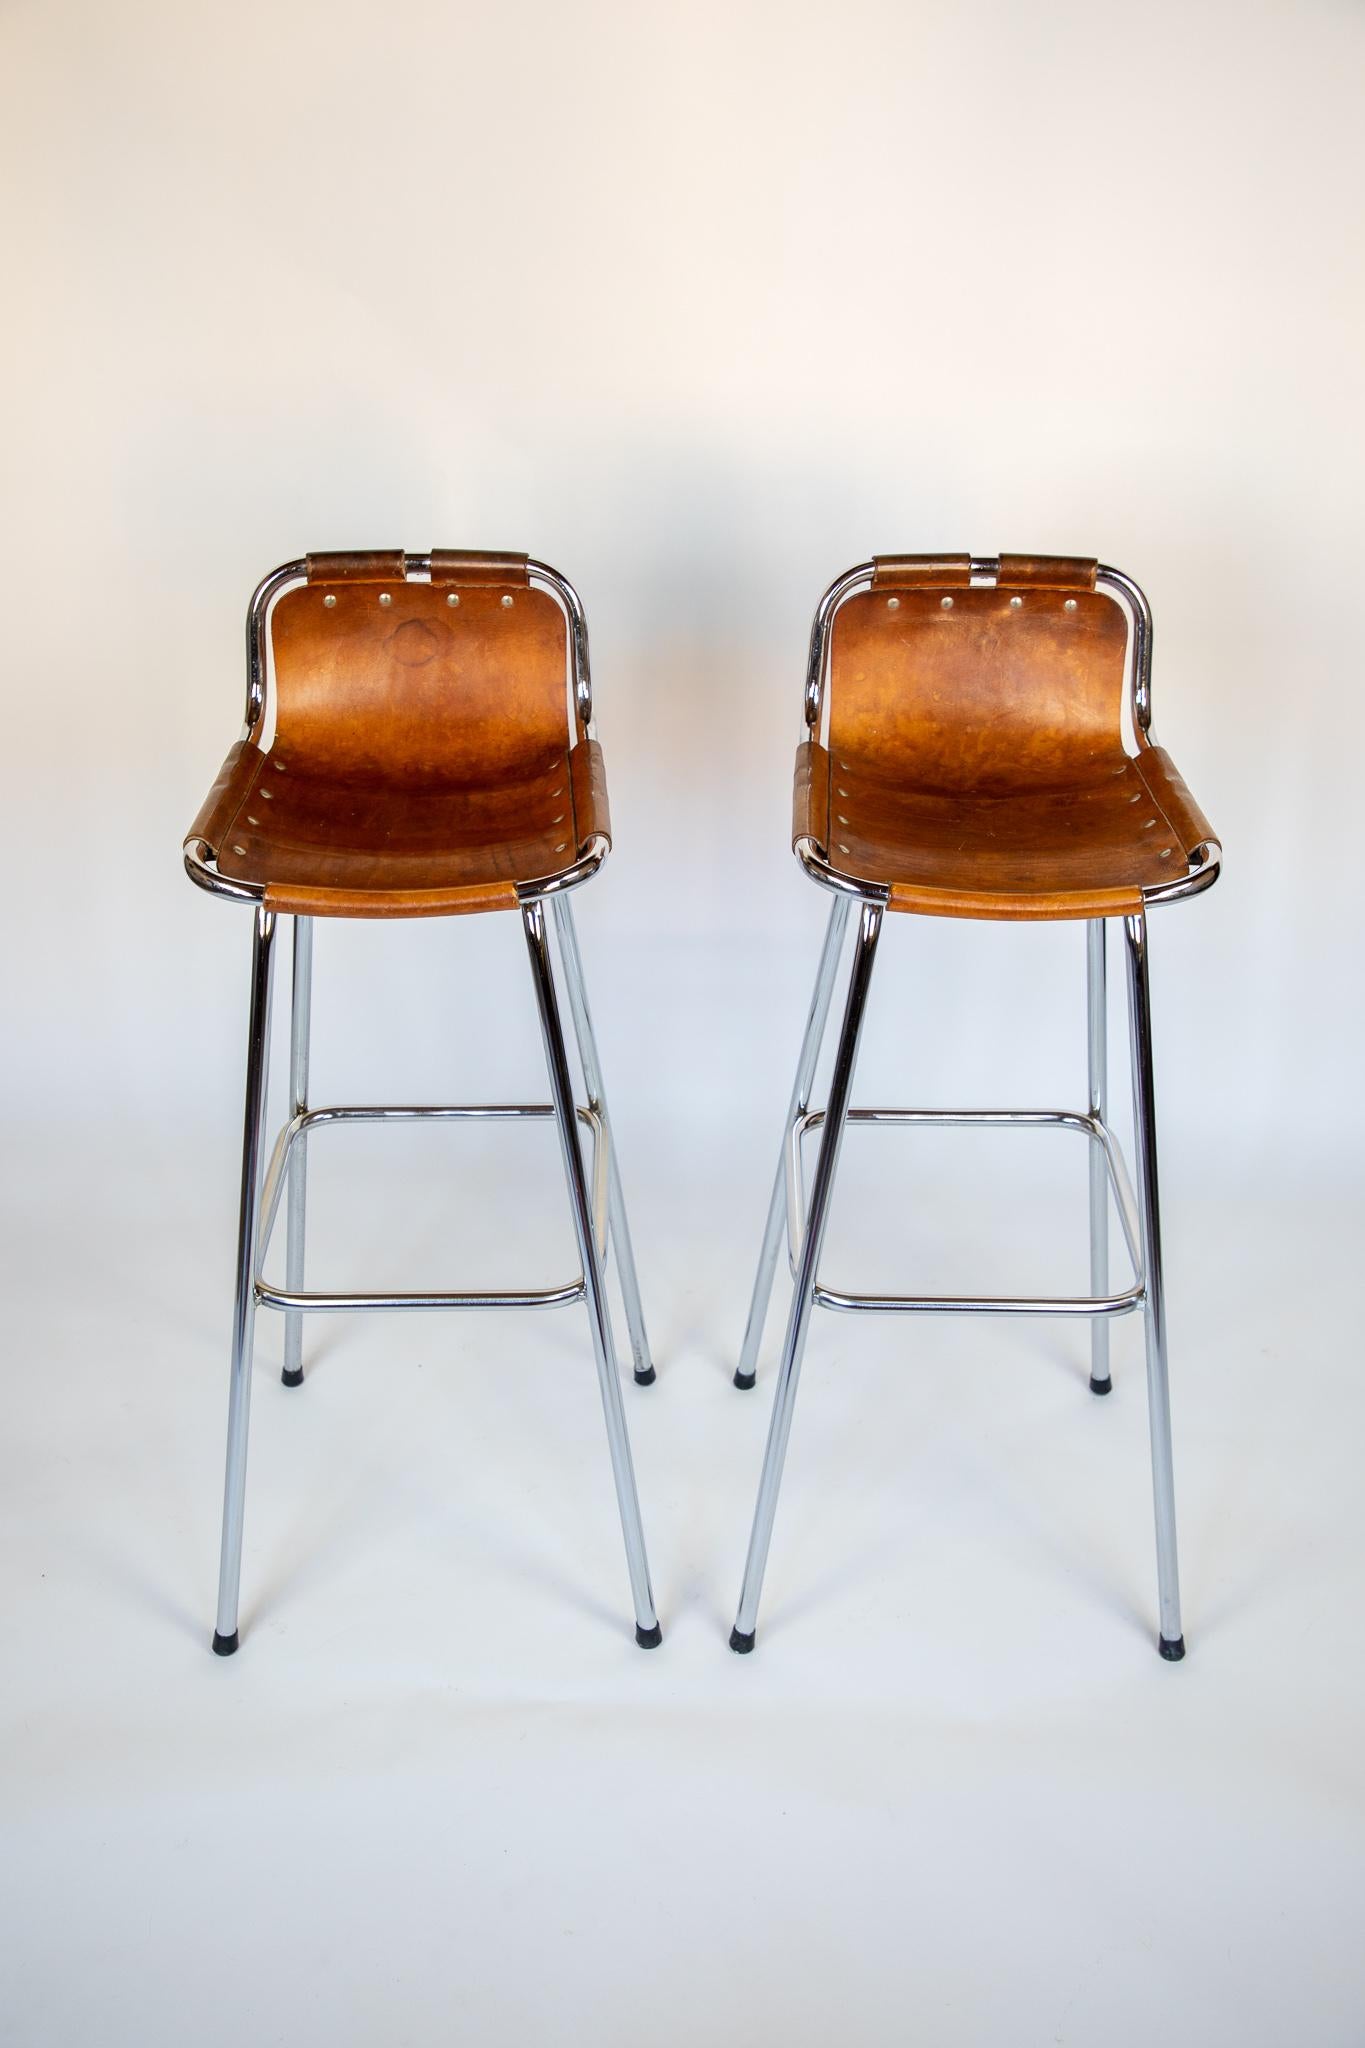 French mid-century saddle leather, brown, chrome bar stools, Perriand, 1960s

Stunning set of 2 French Mid-Century Modern bar stools designed by the famous Designer Charlotte Perriand for the ski resort „Les Arcs“ in France 1960. The stools have